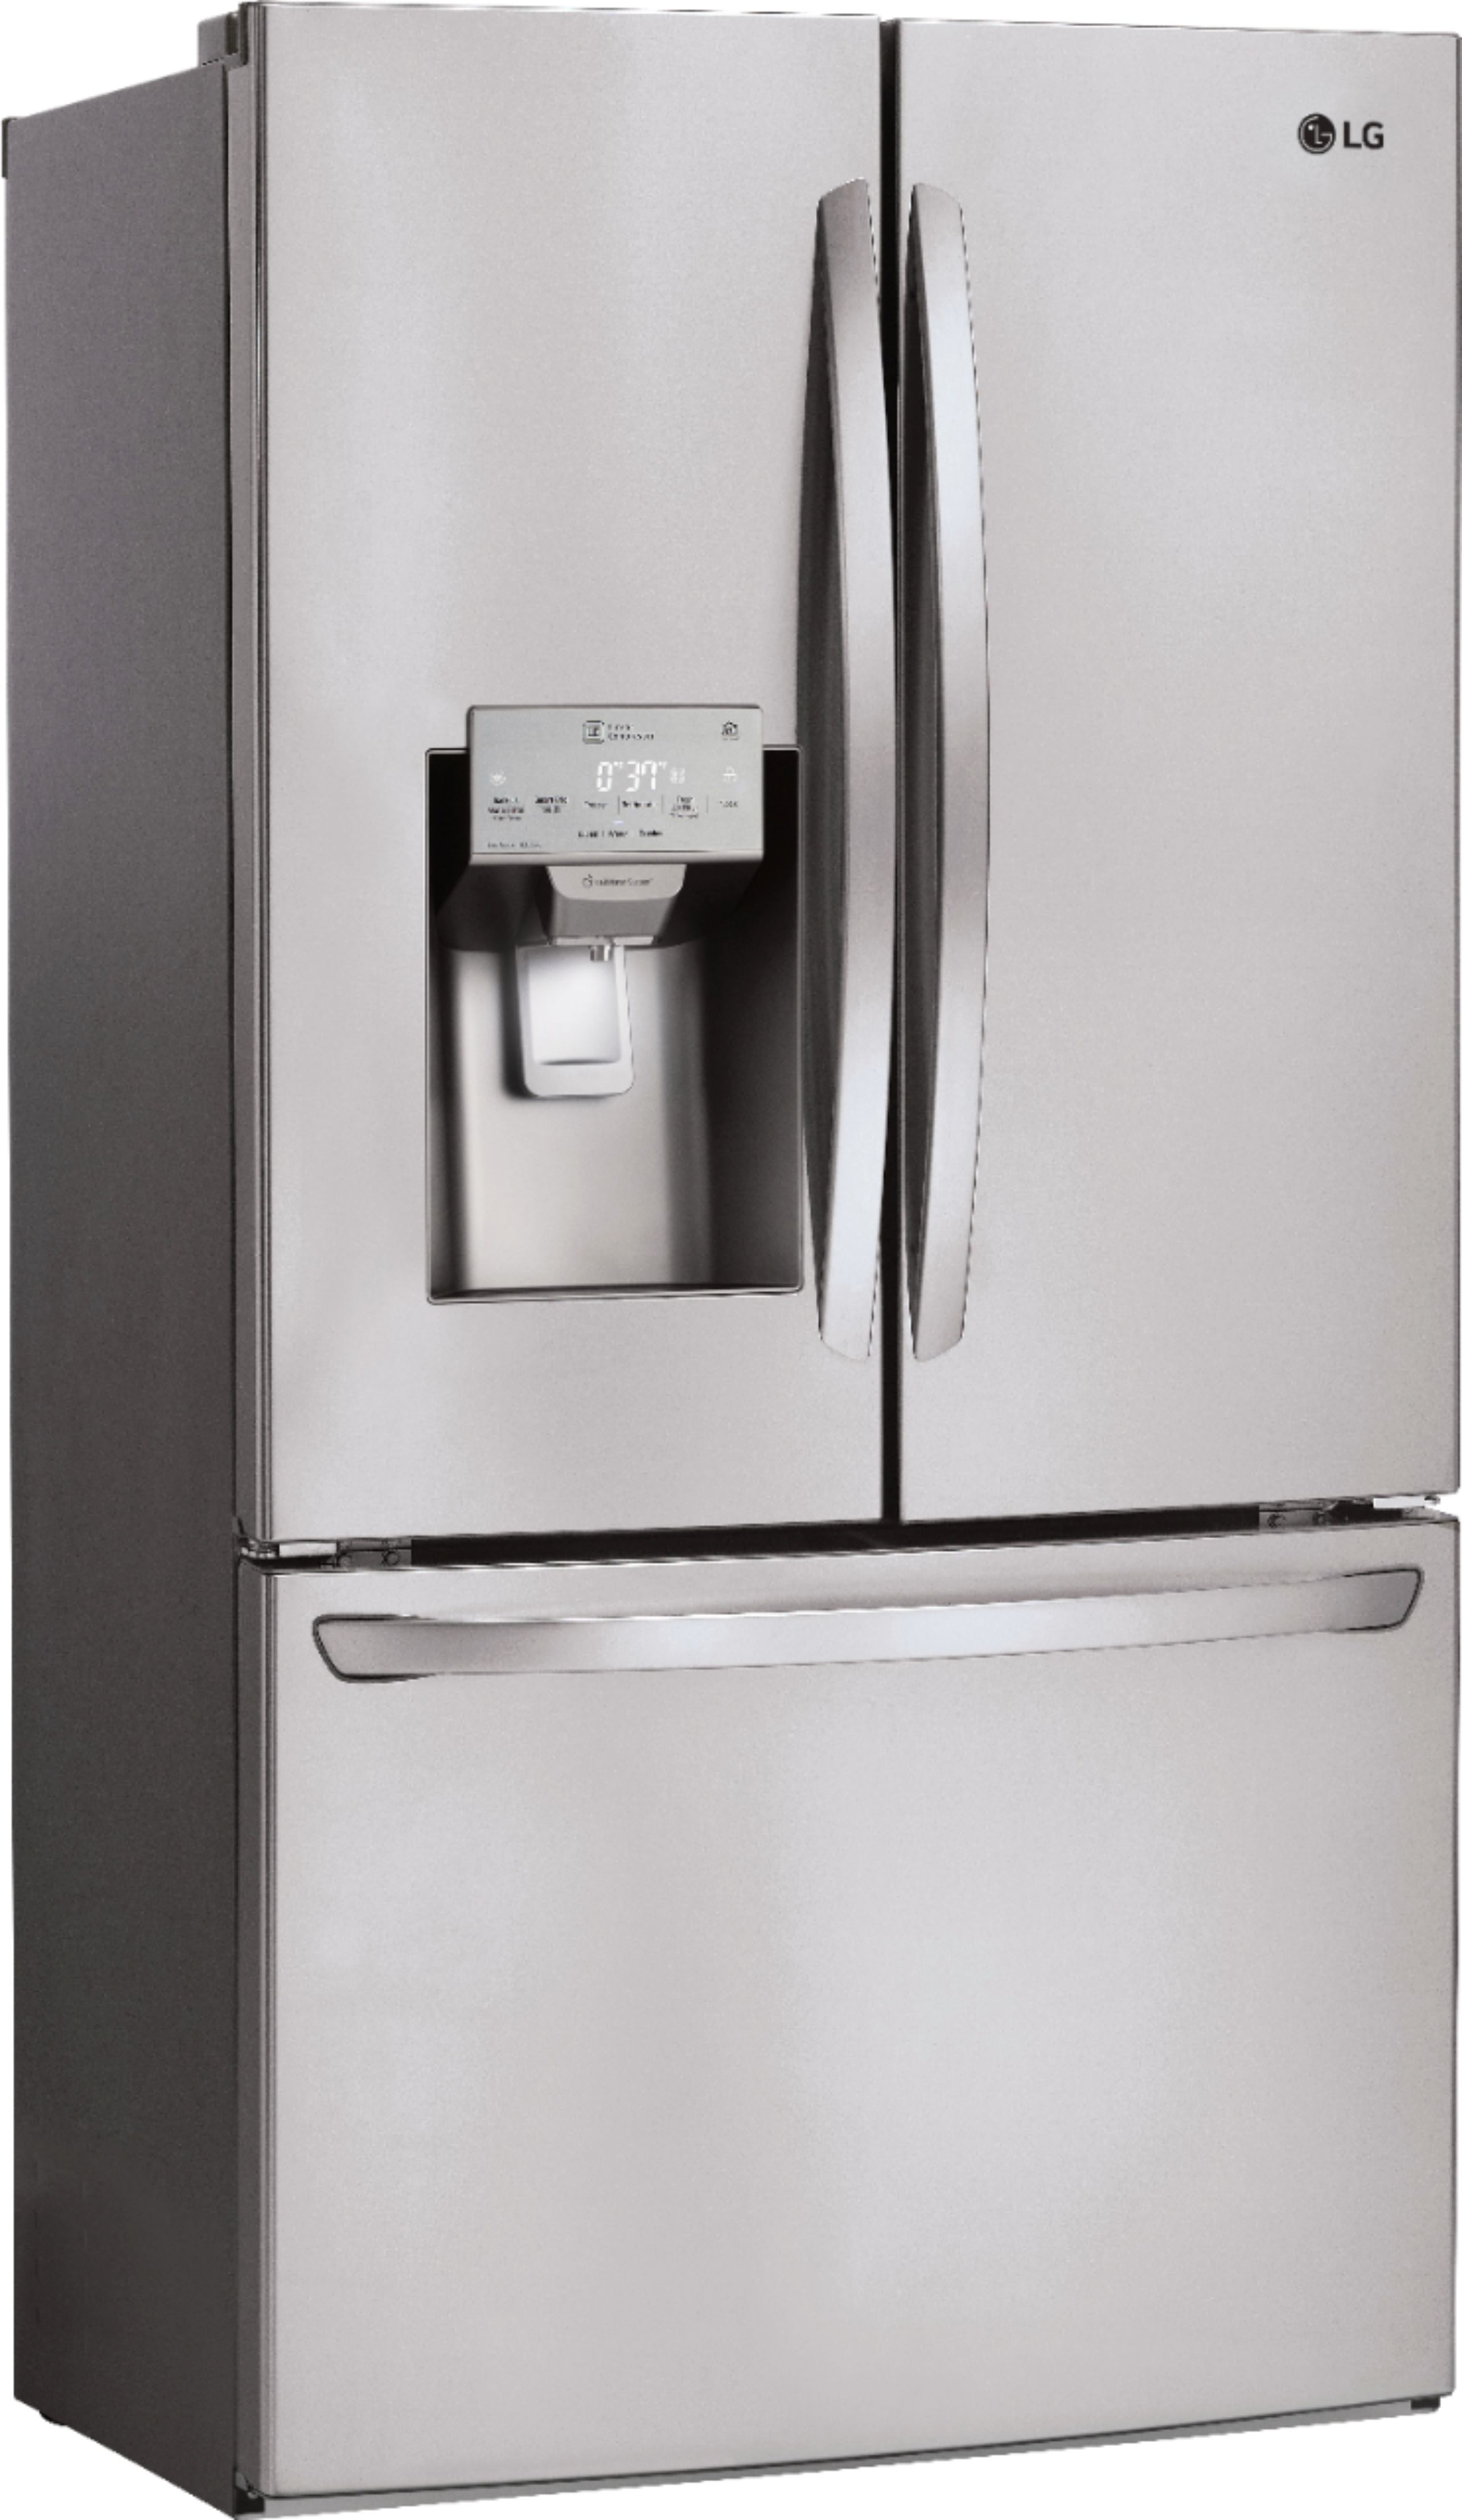 Angle View: LG - 27.9 Cu. Ft. French Door Smart Refrigerator with External Tall Ice and Water Dispenser - Stainless steel